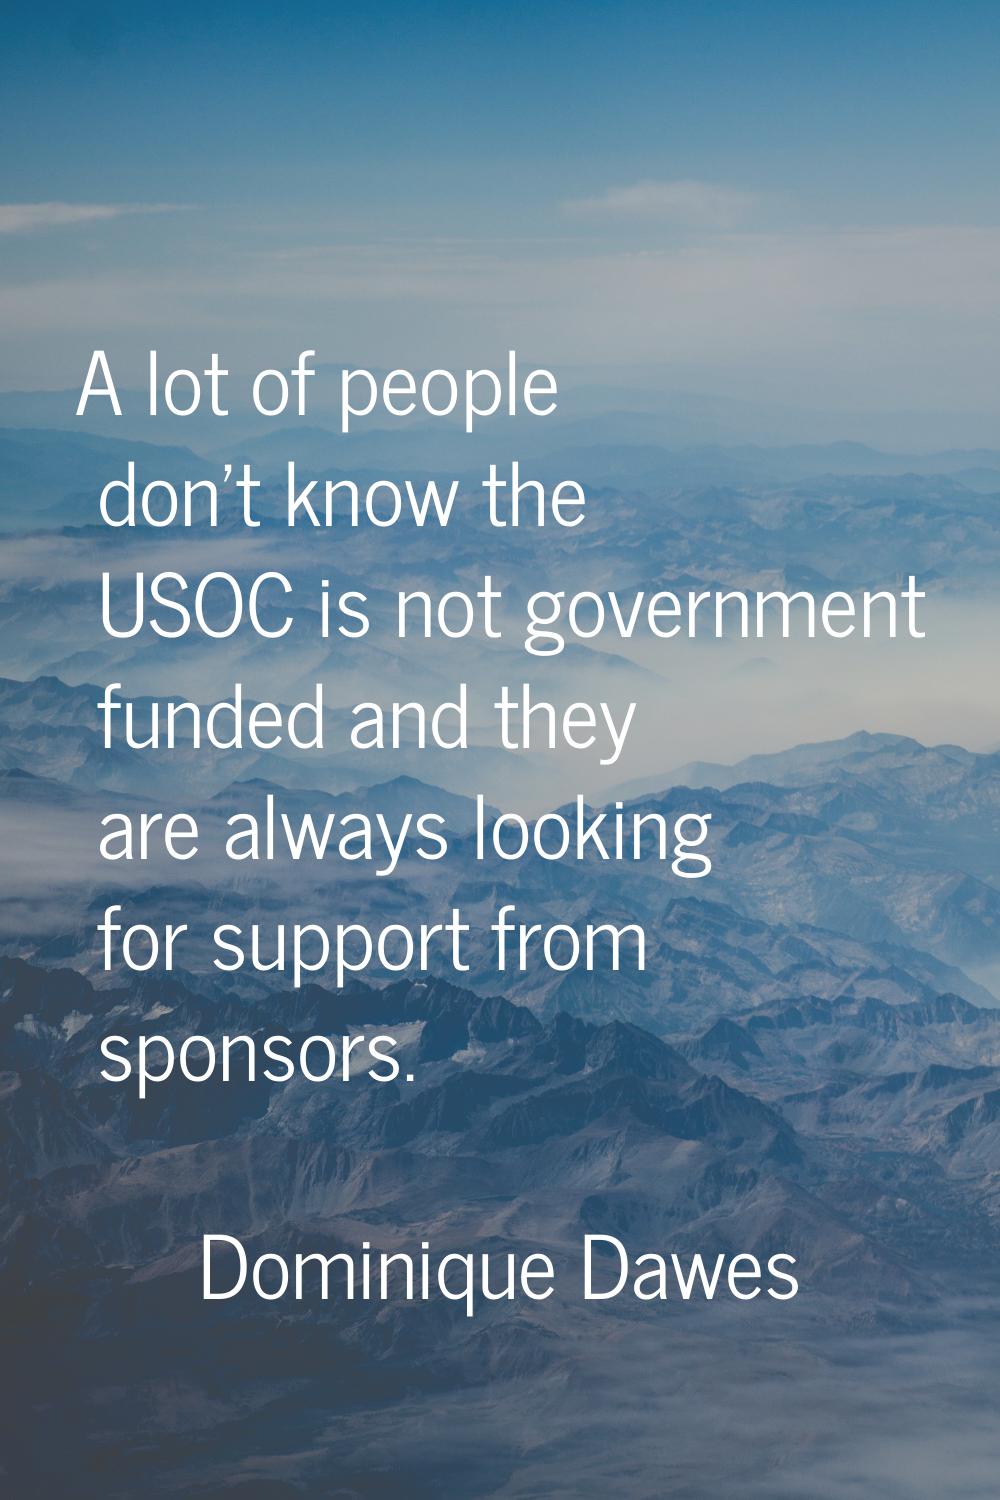 A lot of people don't know the USOC is not government funded and they are always looking for suppor